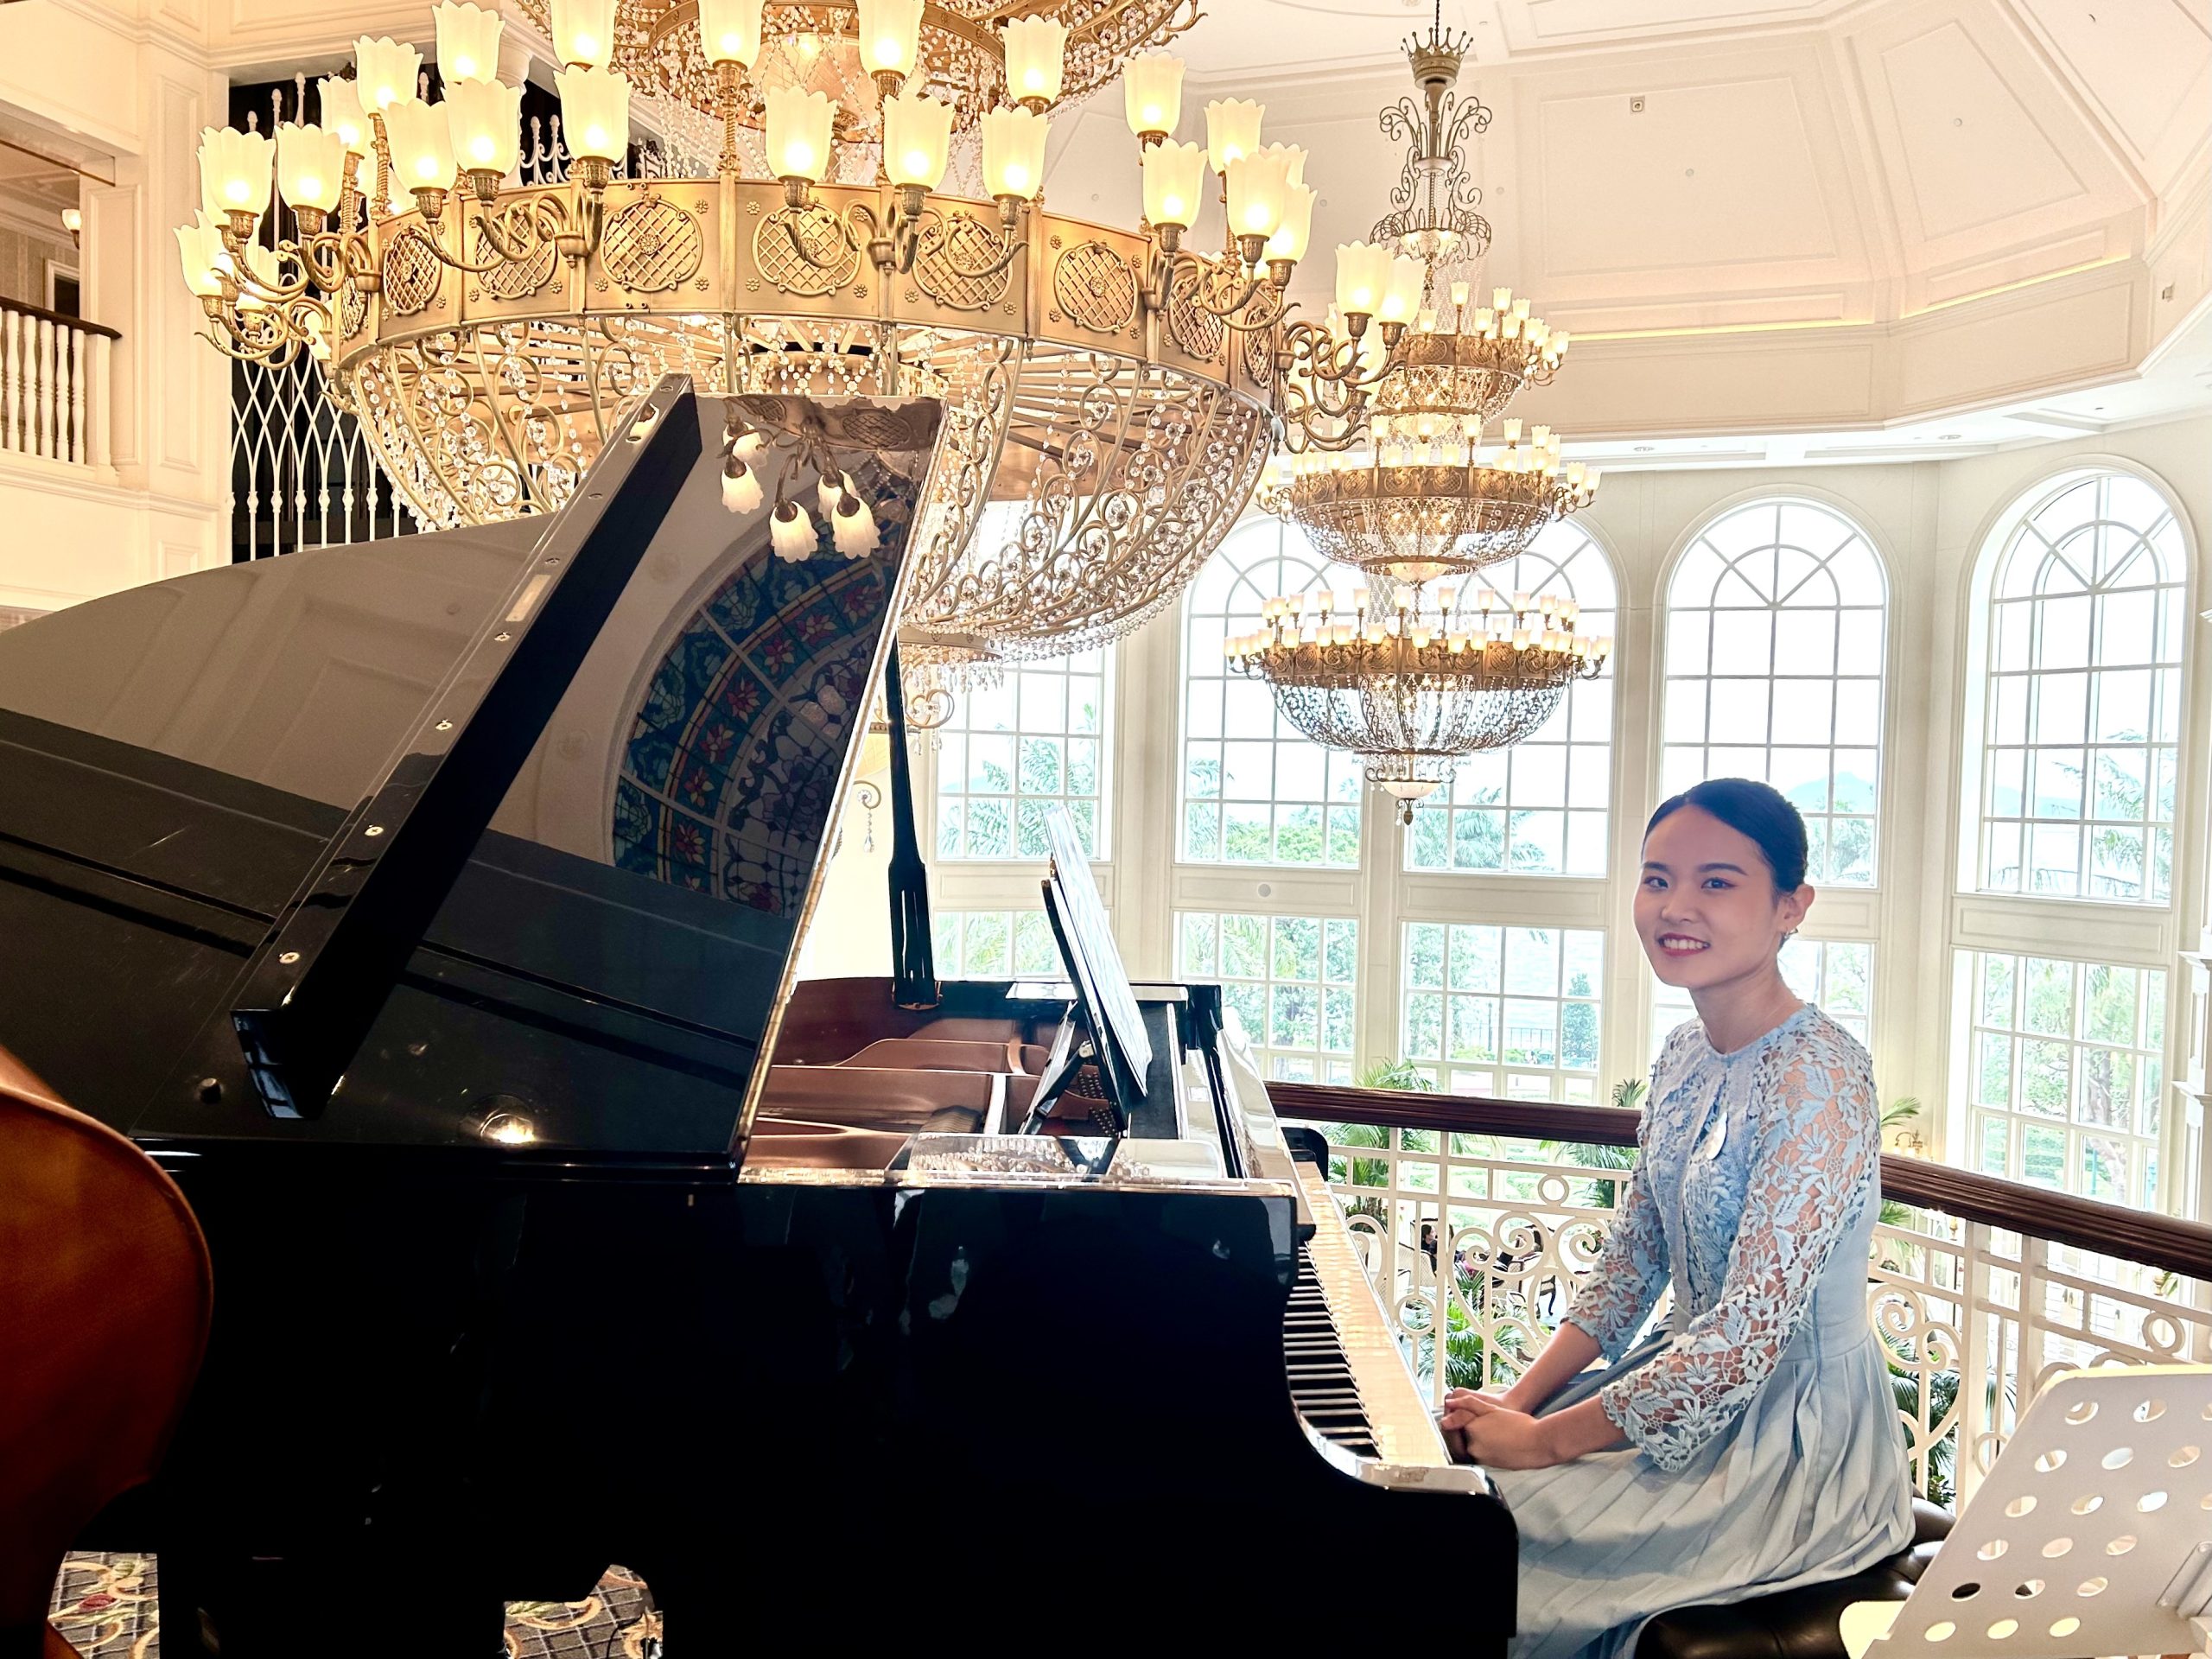 Natalie Yen posing for a photo, sitting at a piano